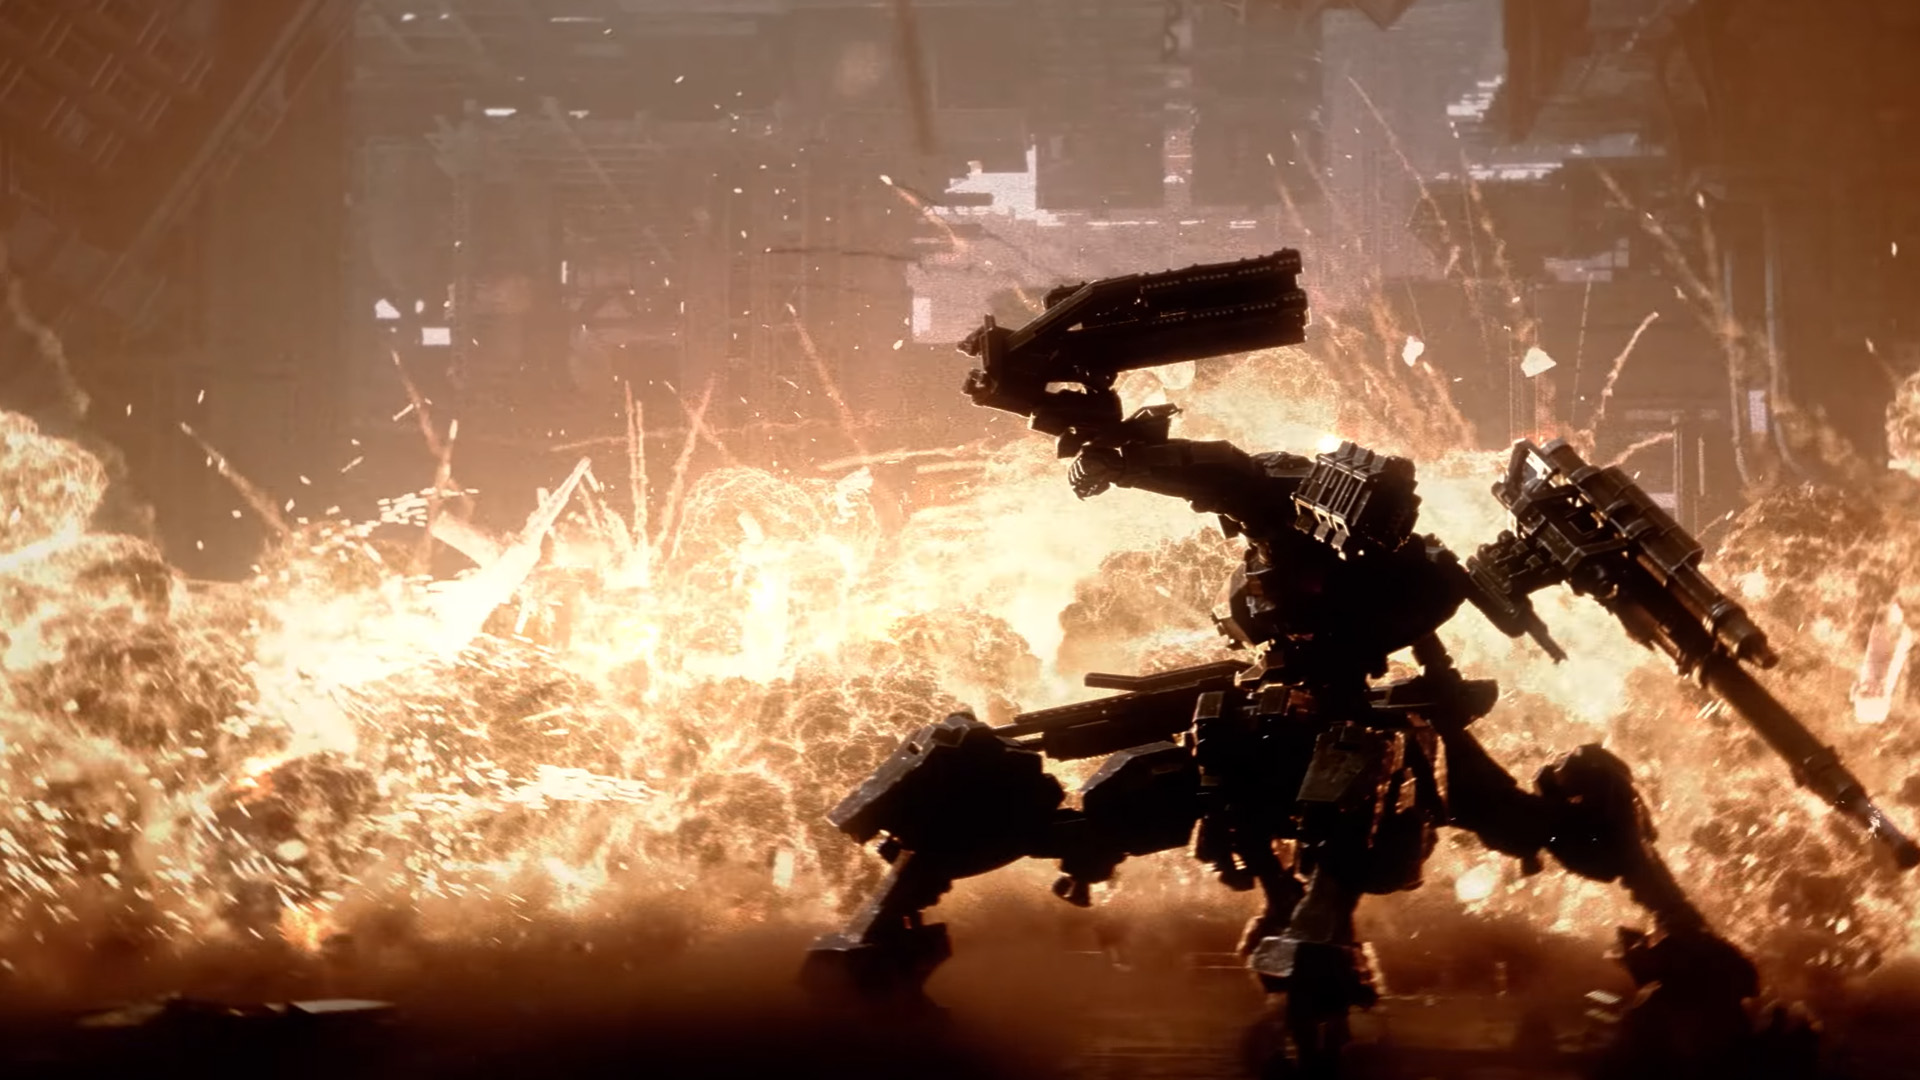 download armored core 6 fires of rubicon